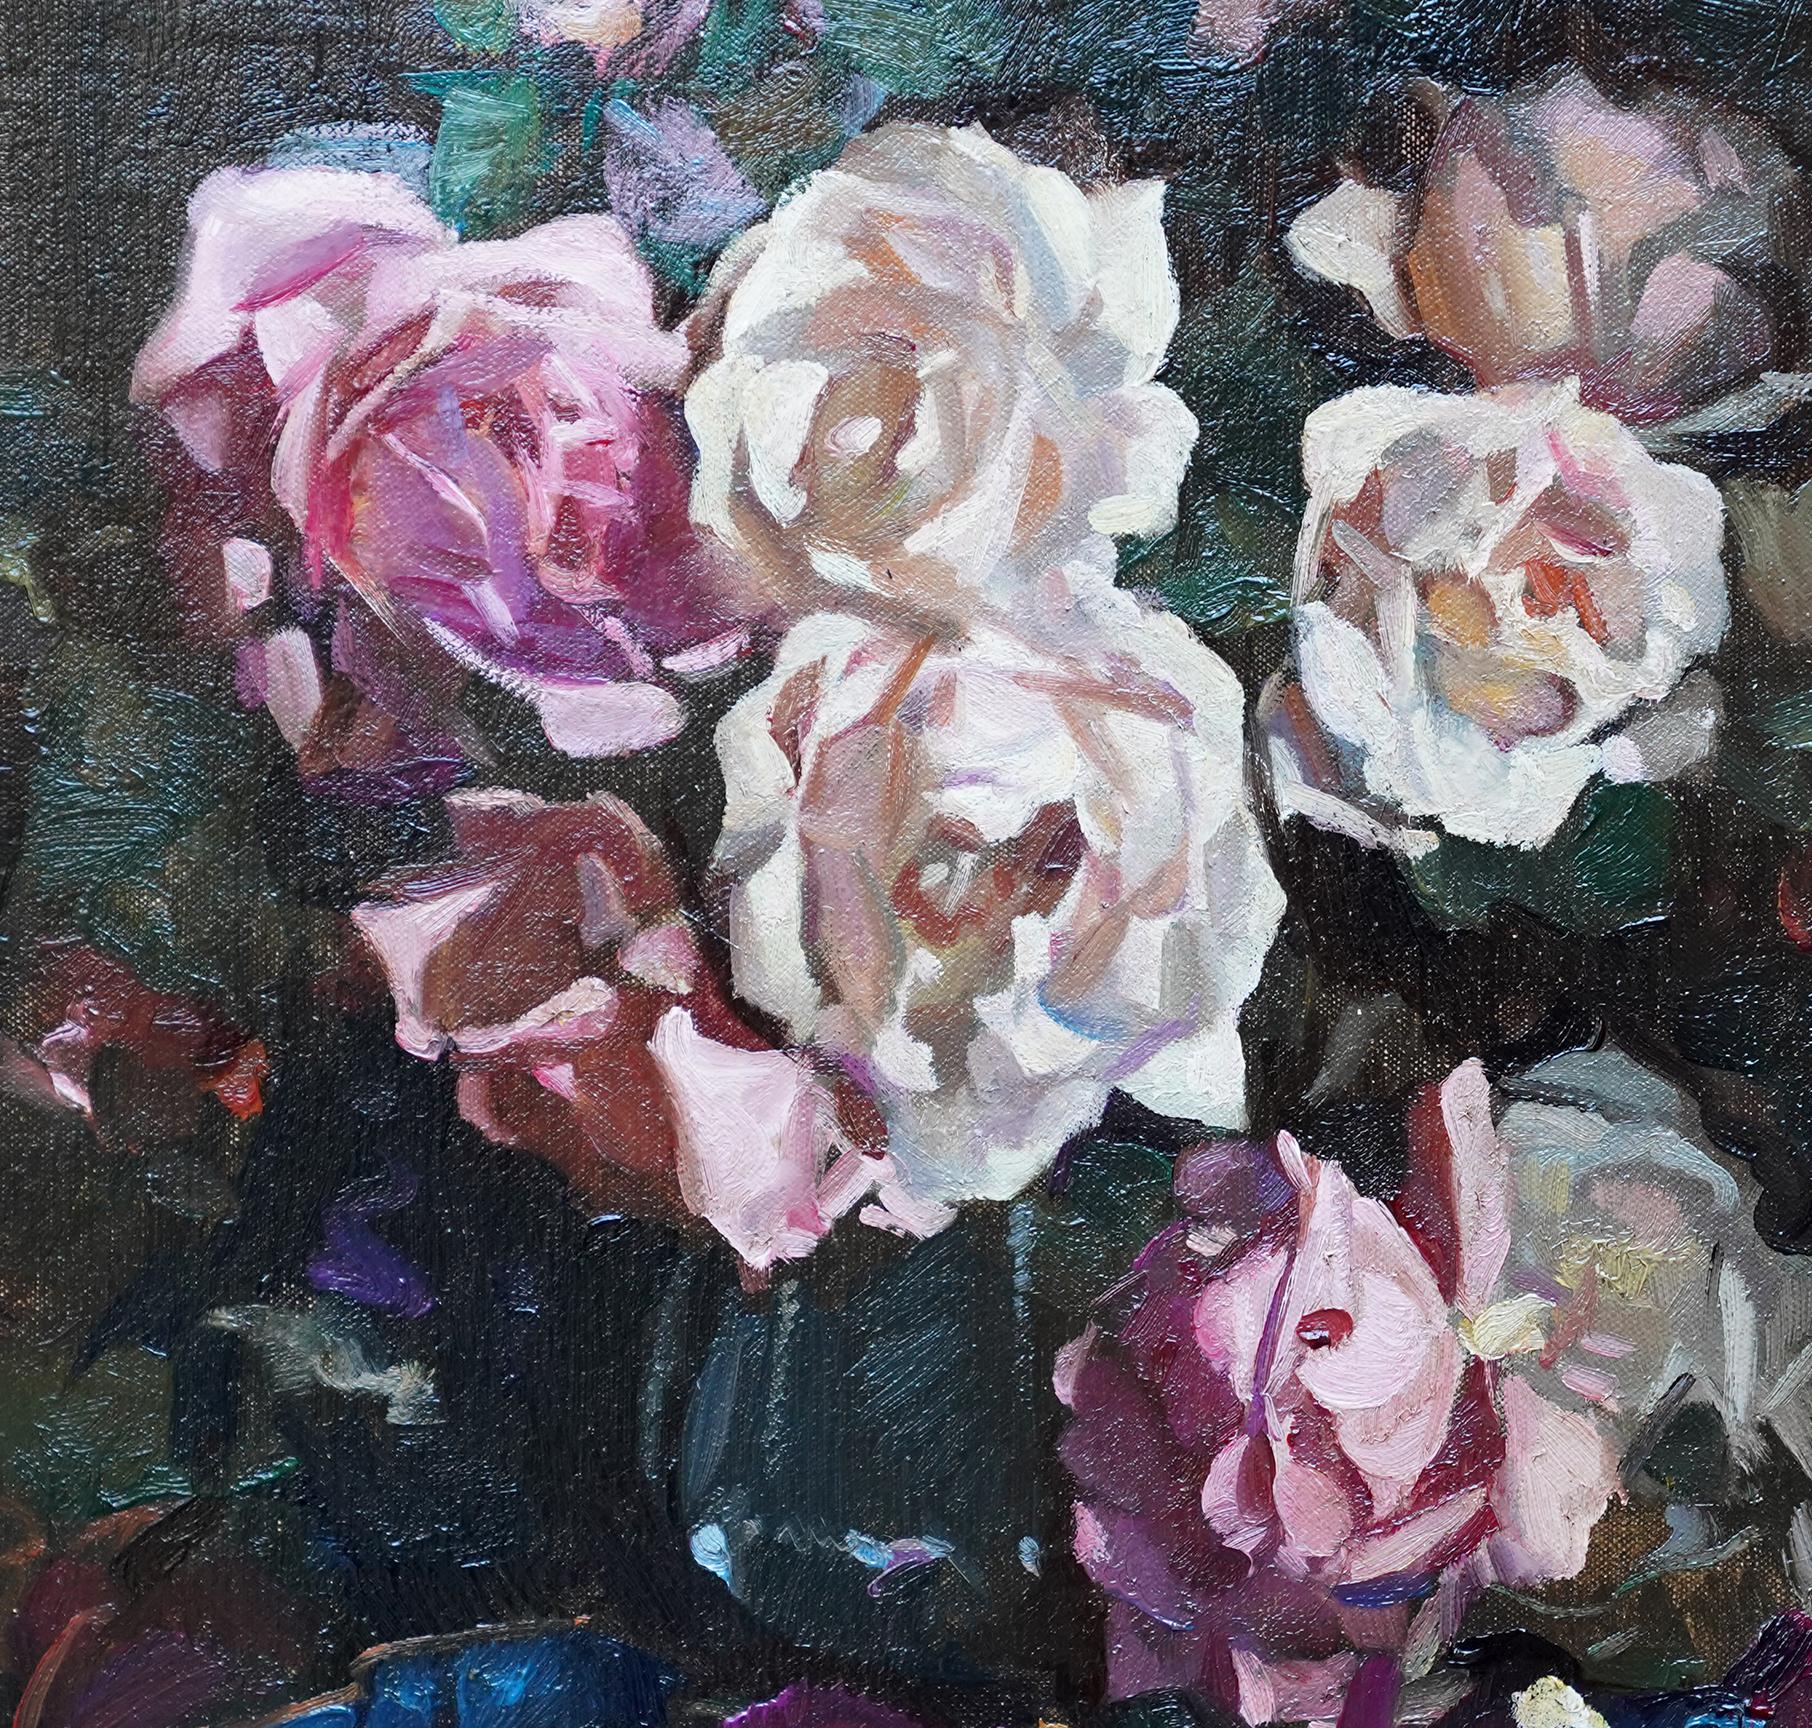 This superb floral still life oil painting is by Scottish artist David Alison. Painted circa 1930 it is an arrangement of pink roses in a glass vase on a table. The darker background makes the roses burst off the canvas with colour. A member of the